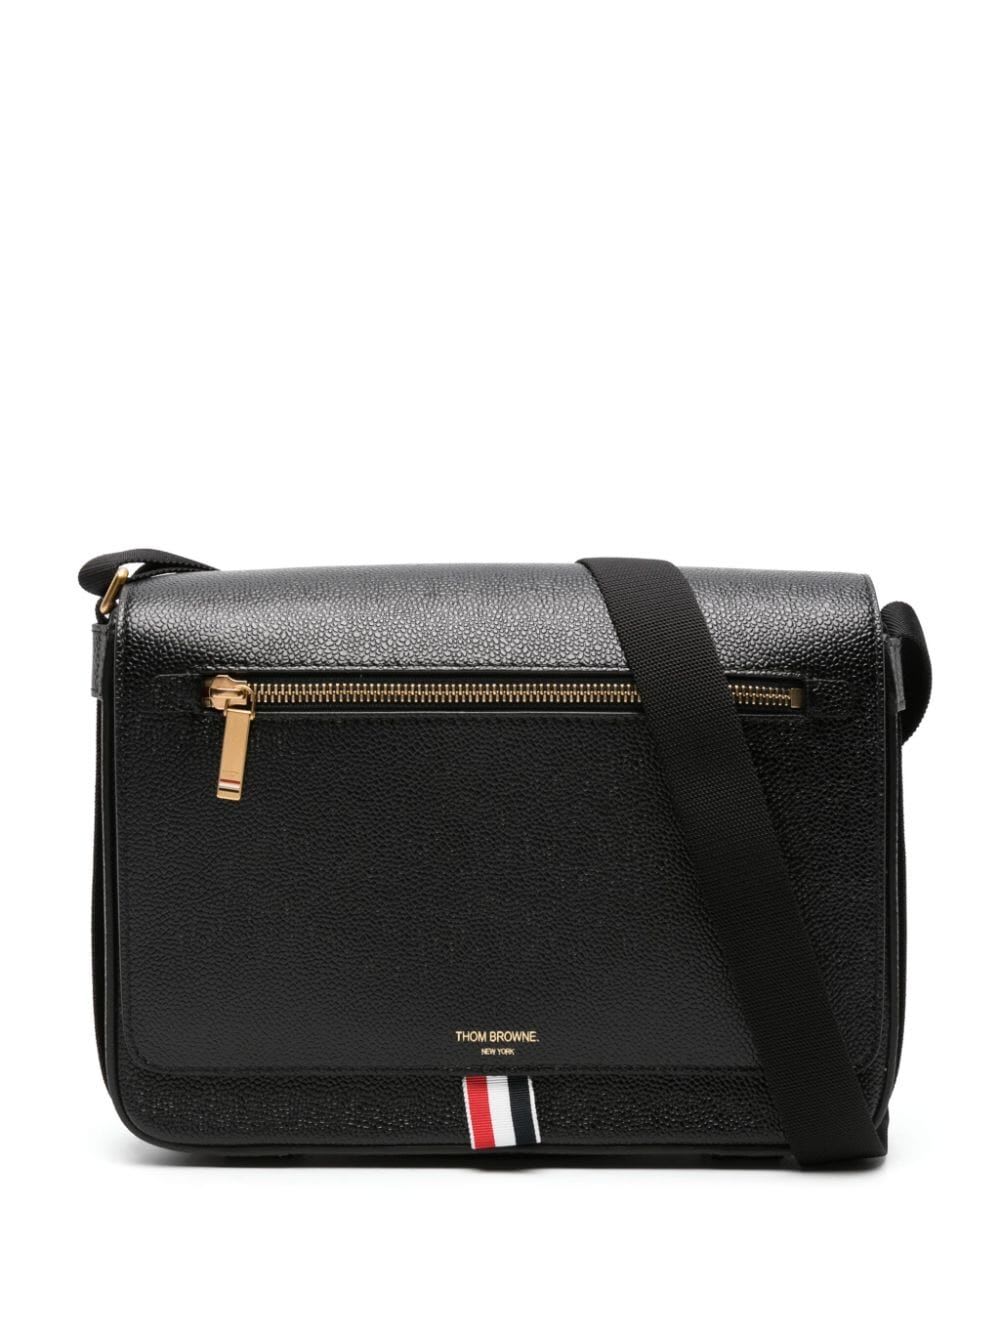 Thom Browne Reporter Bag With Webbing Strap In Pebble Grain Leather In Black